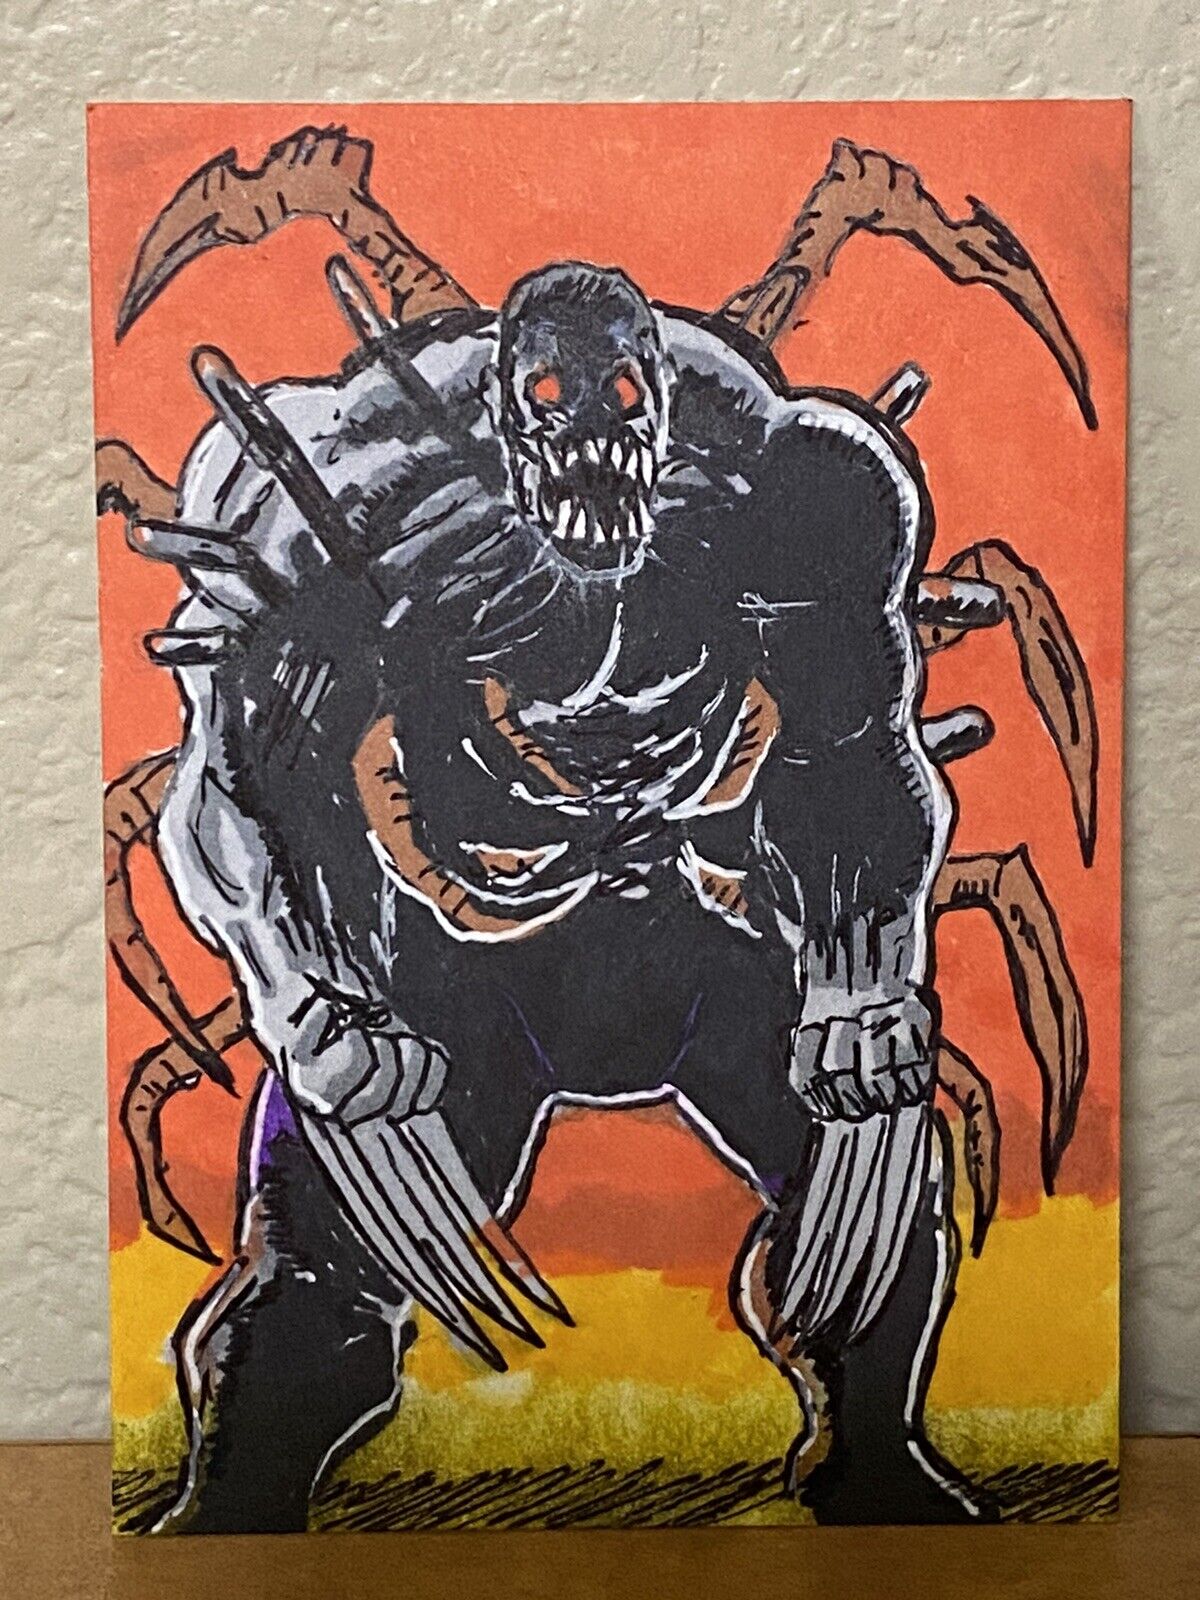 Weapon H #3 Brood Cover Of Clay Original 1 Of 1 Sketch Card By Nate Rosado 